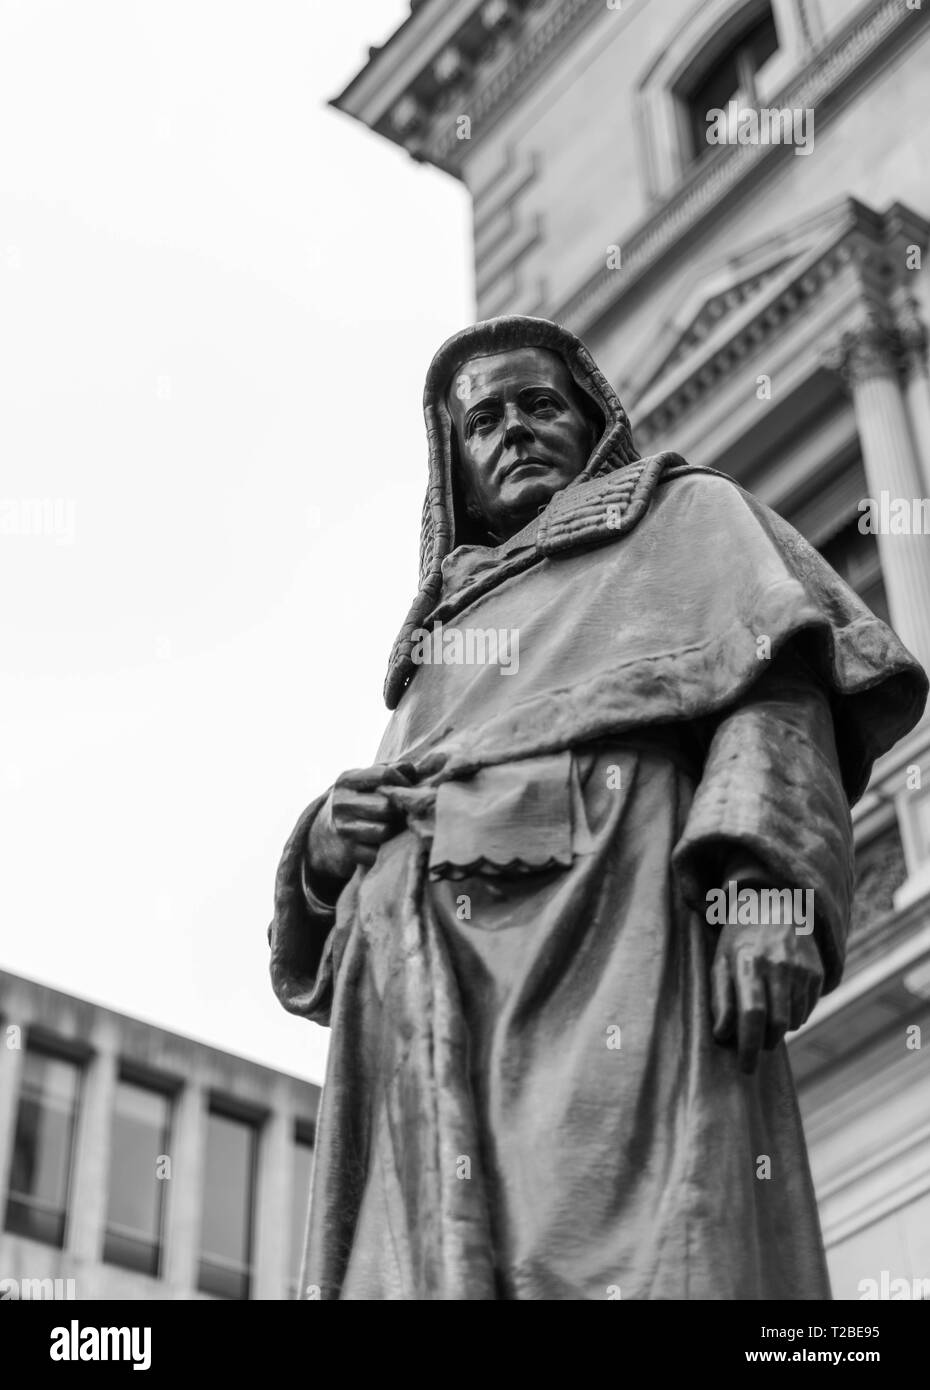 Statue of judge or Lawyer looking down with a nice background with negative space Stock Photo